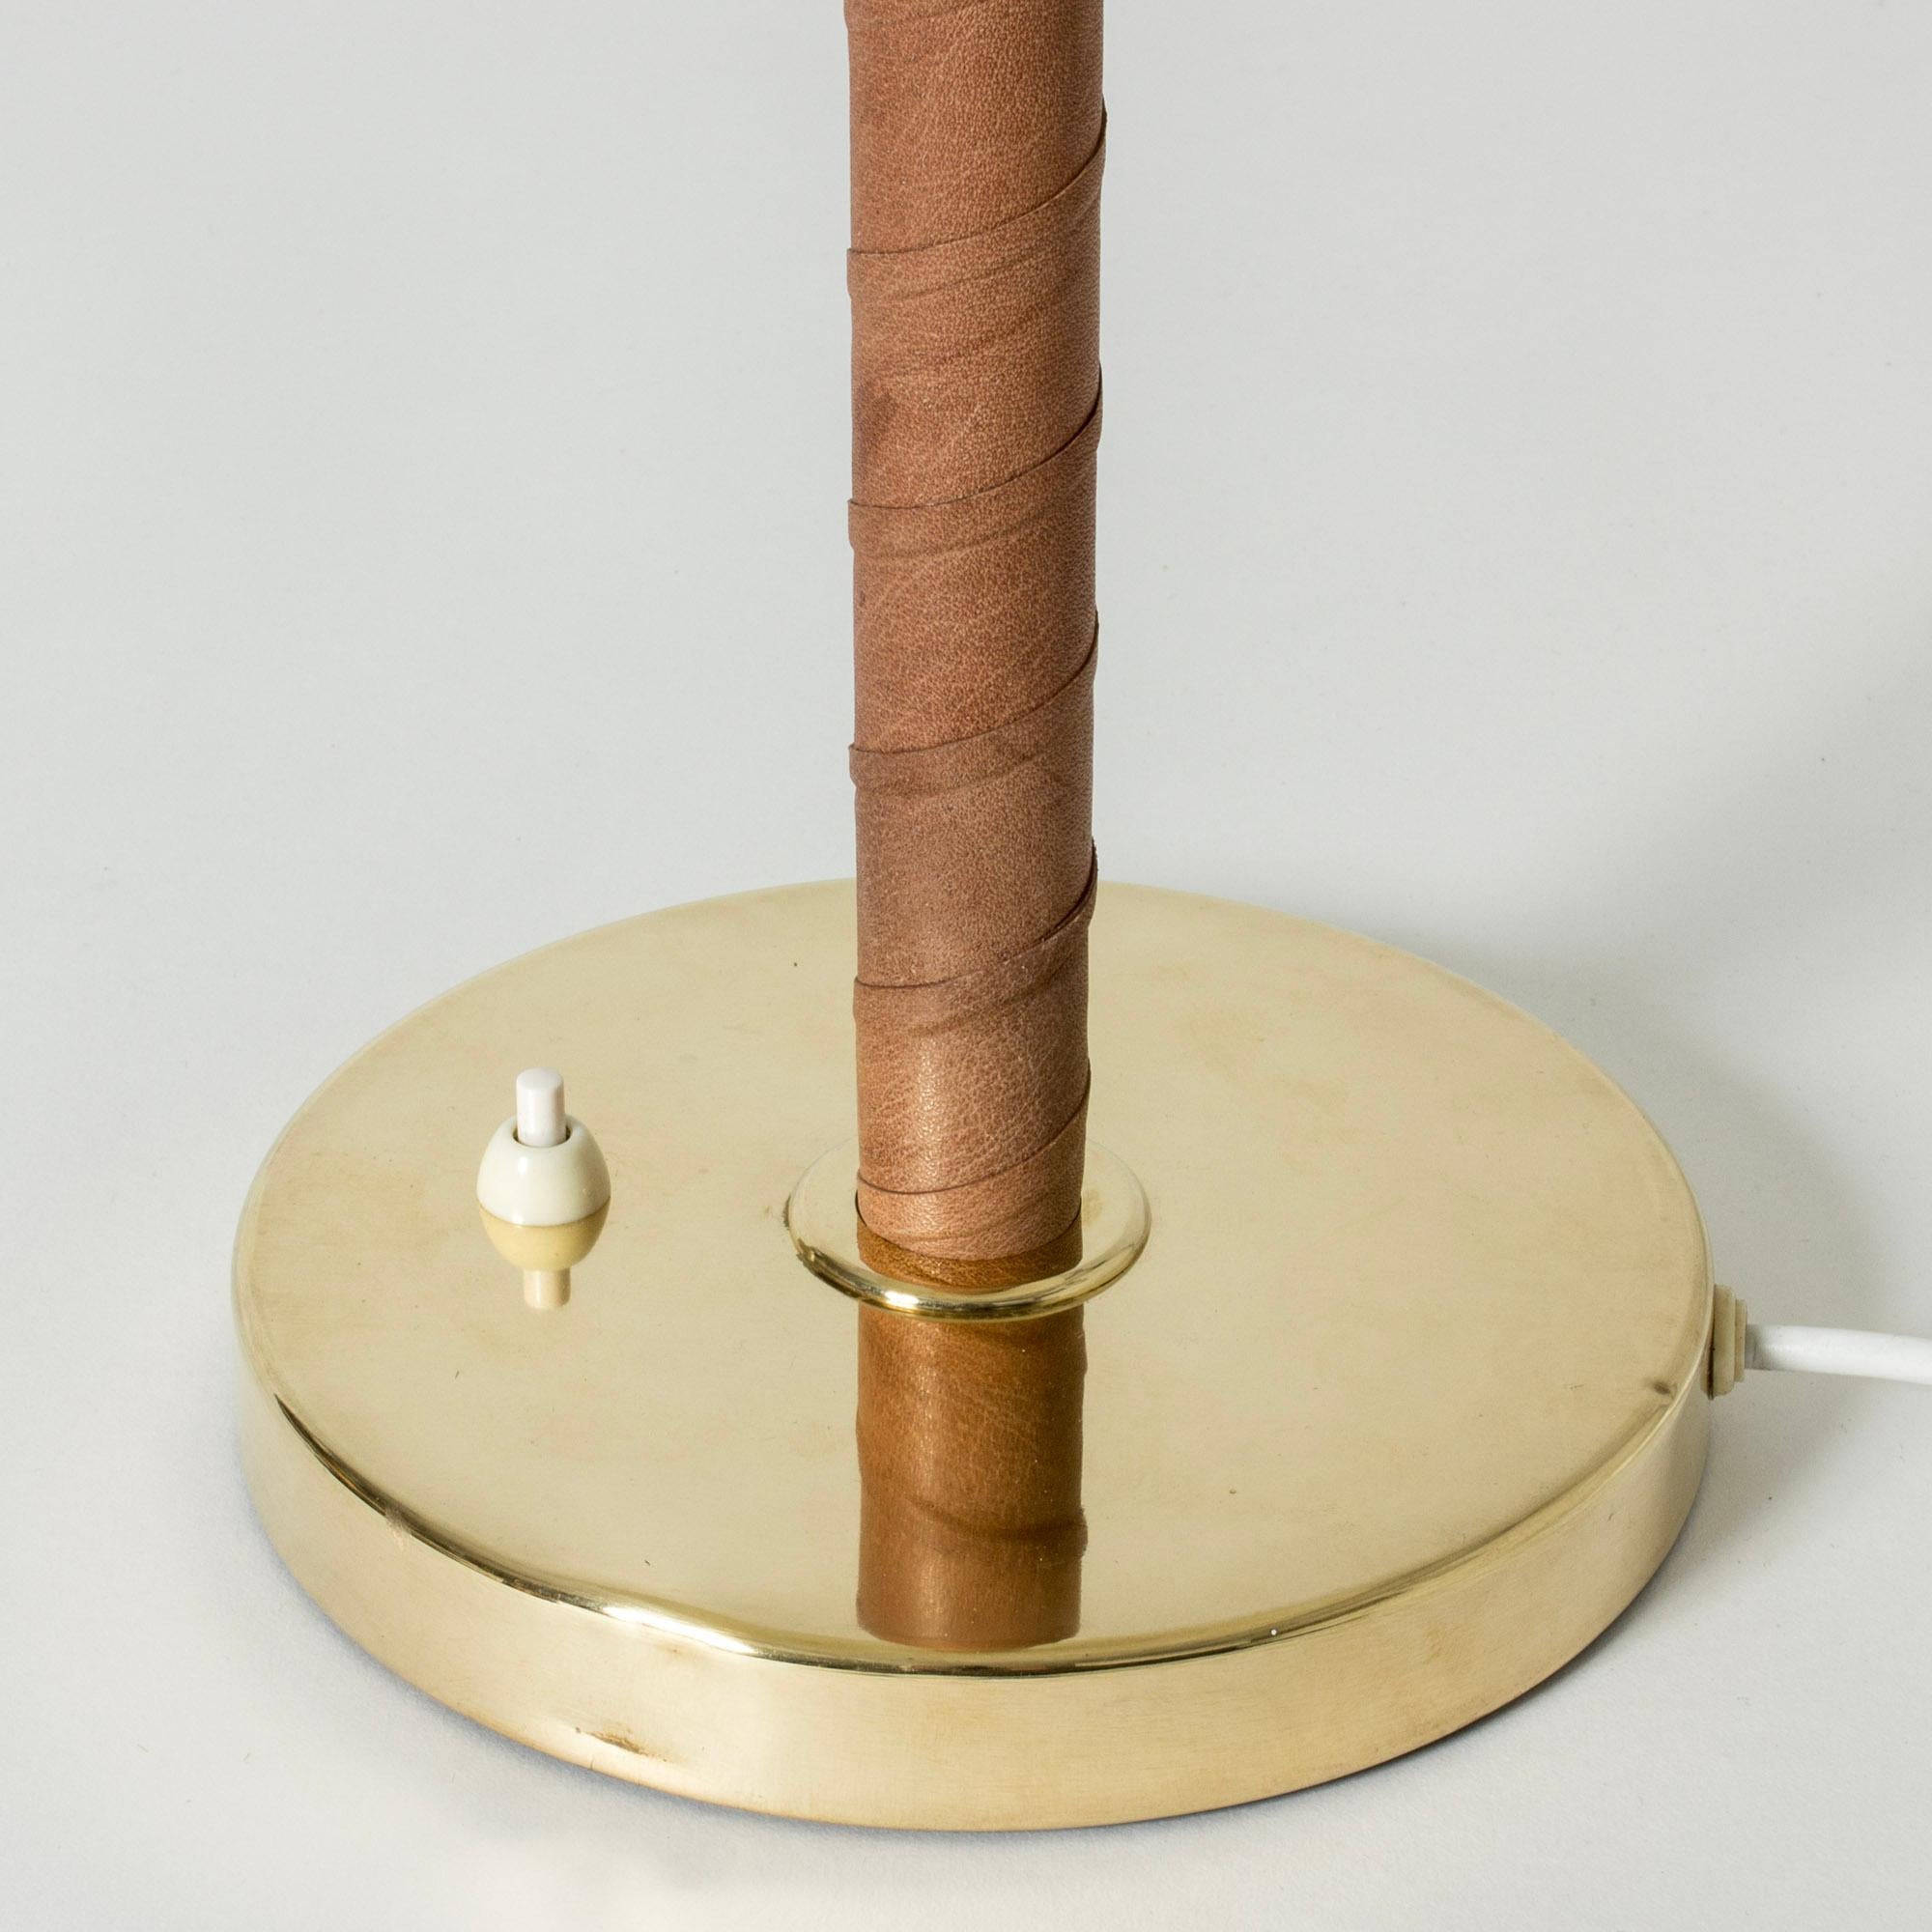 Swedish Brass, Mahogany and Leather Table Lamp from Böhlmarks, Sweden, 1940s